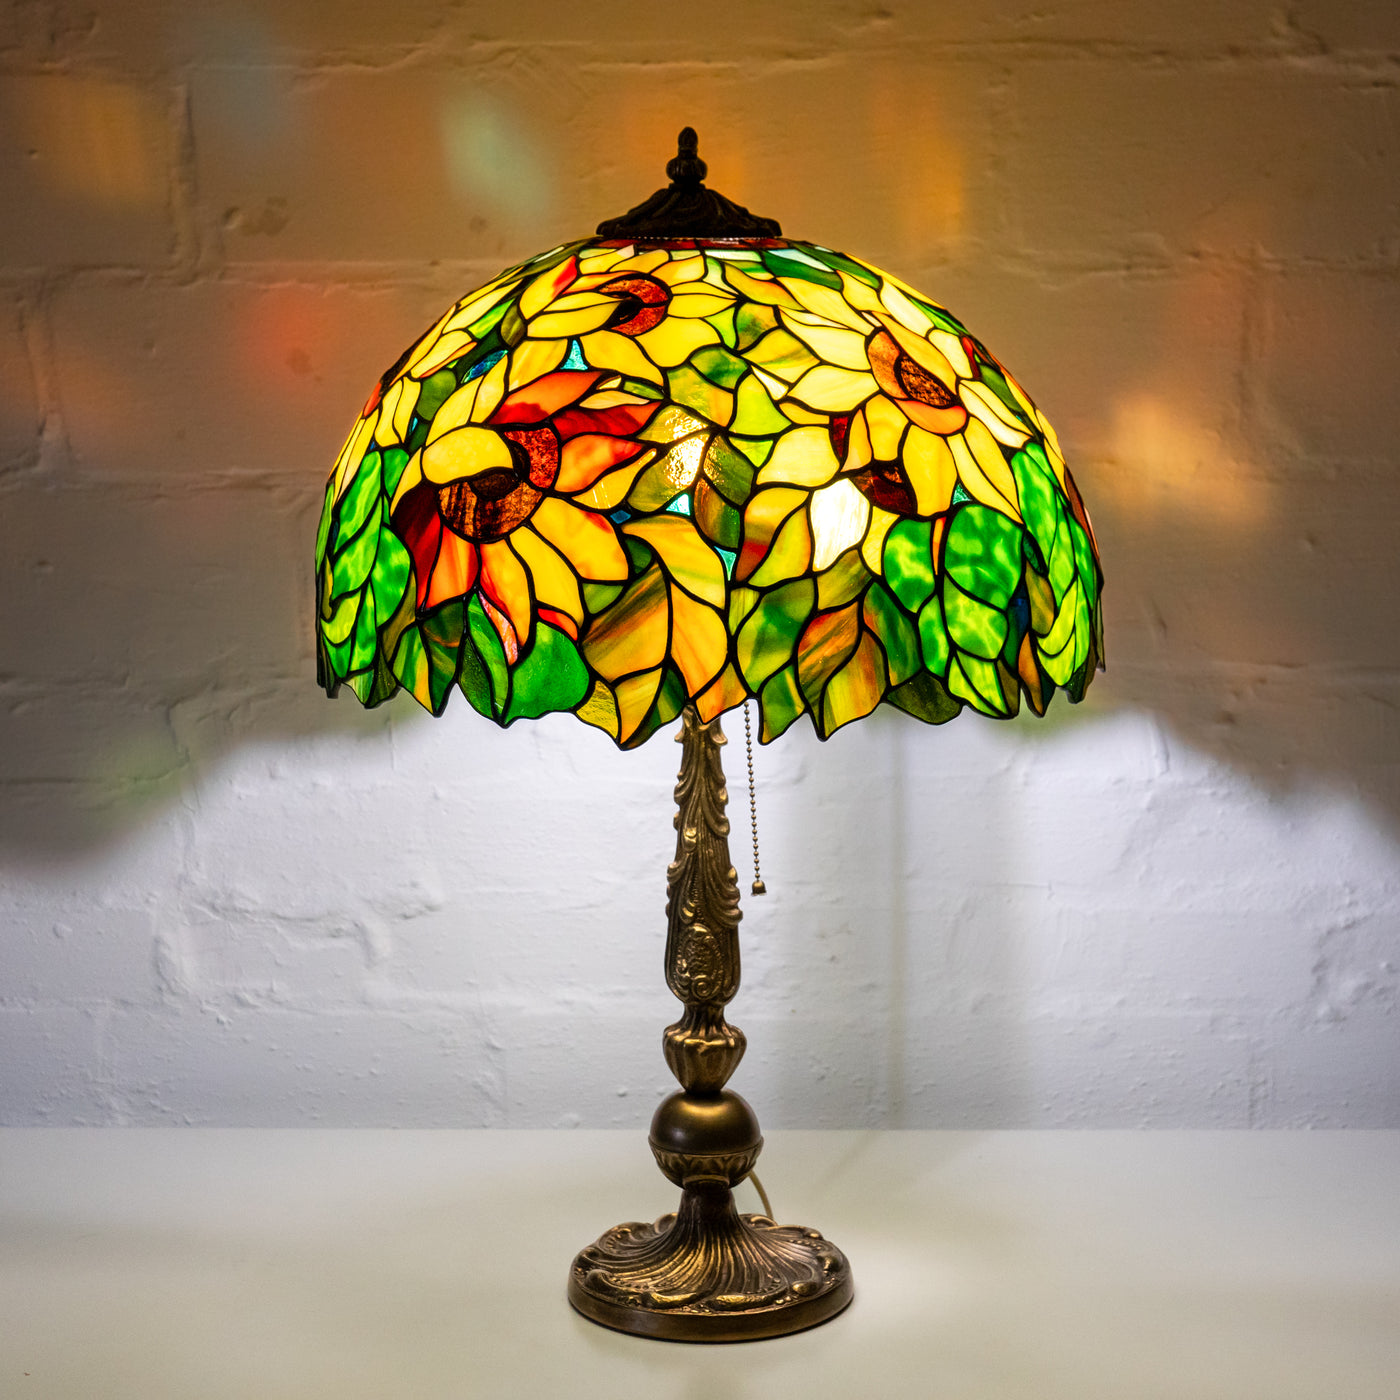 Tiffany lamp stained glass sunflower